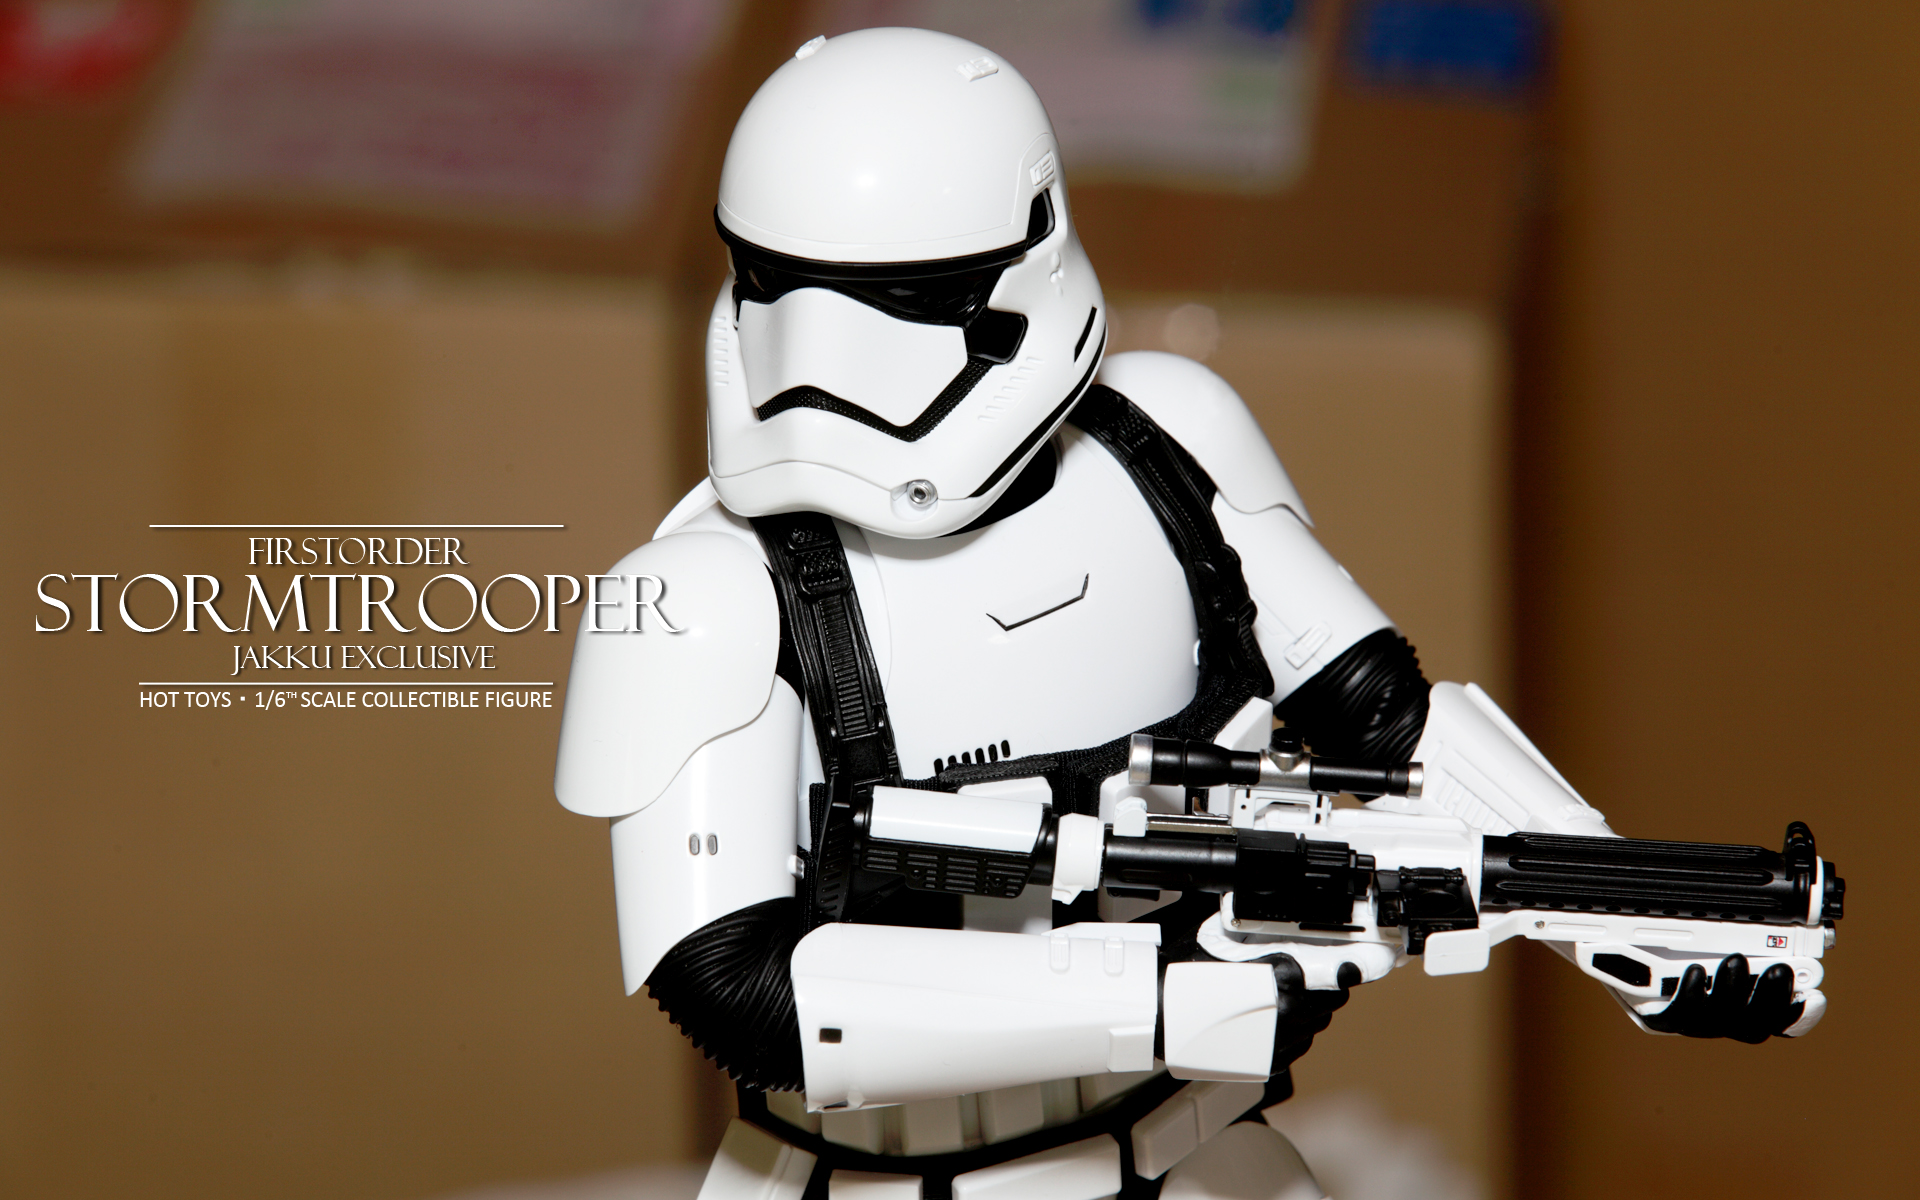 hottoys-star-wars-the-force-awakens-first-order-stormtrooper-jakku-picture06